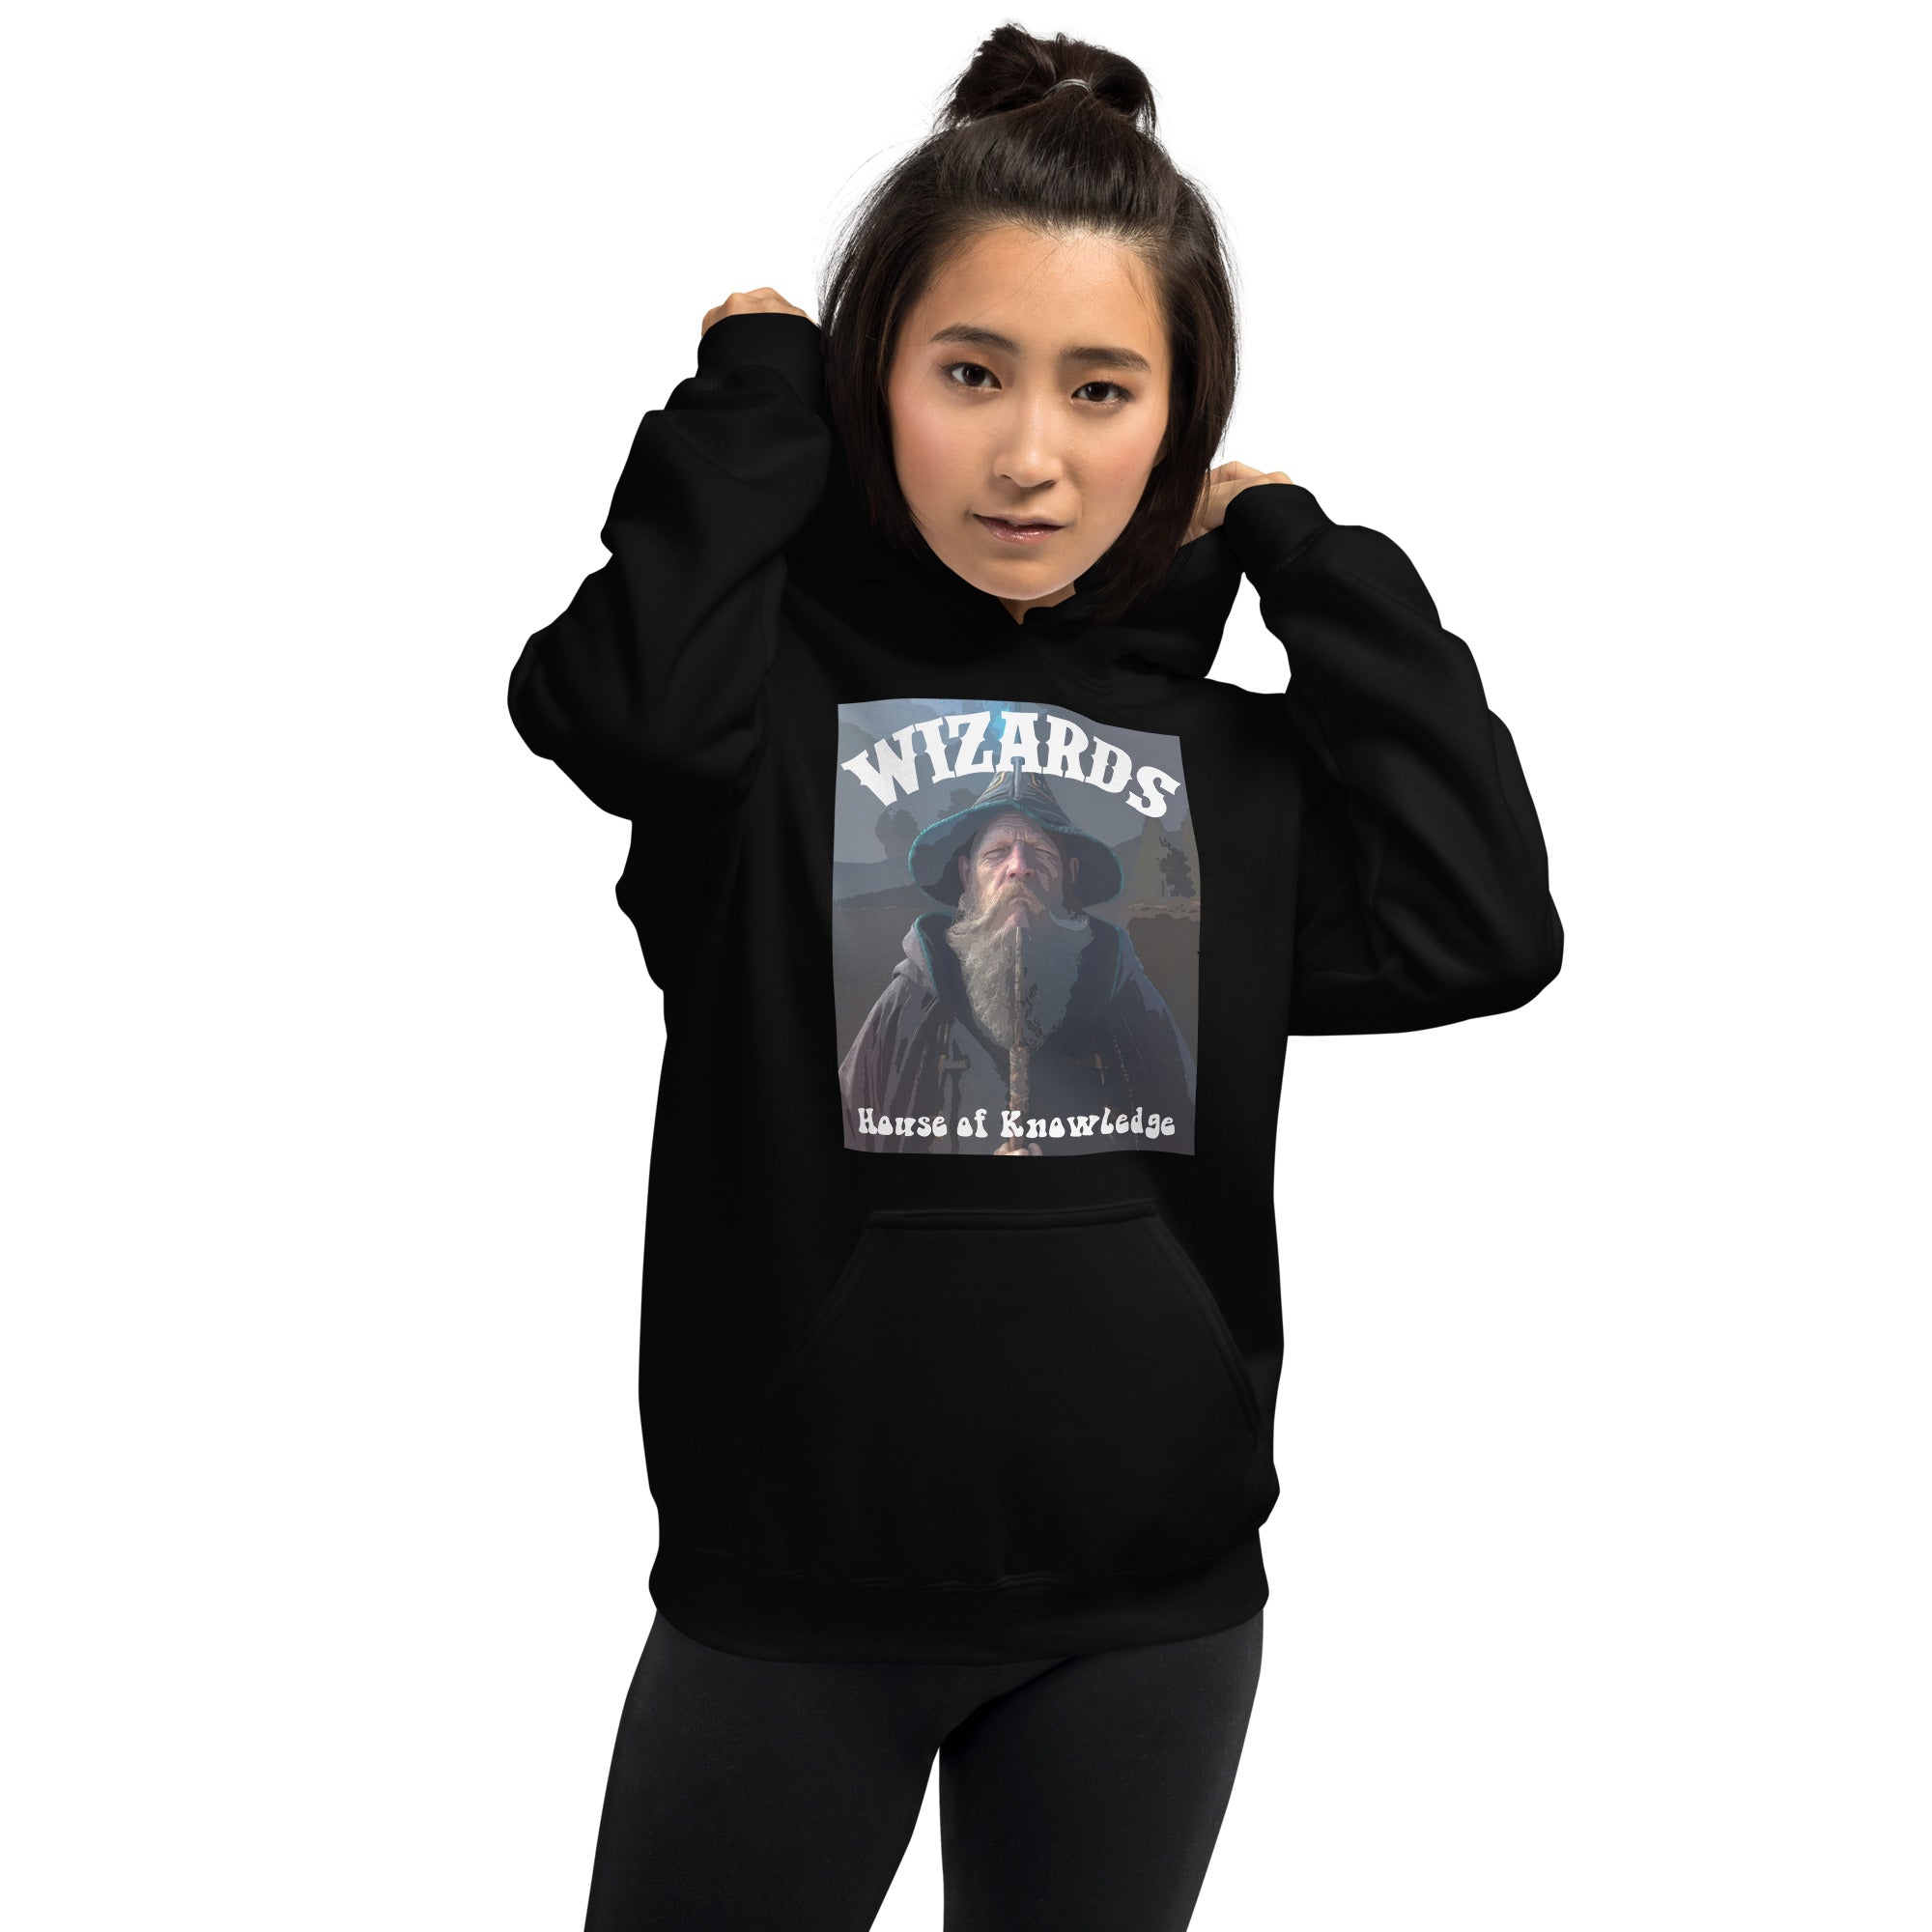 Wizards House of Knowledge v2 Unisex Hoodie